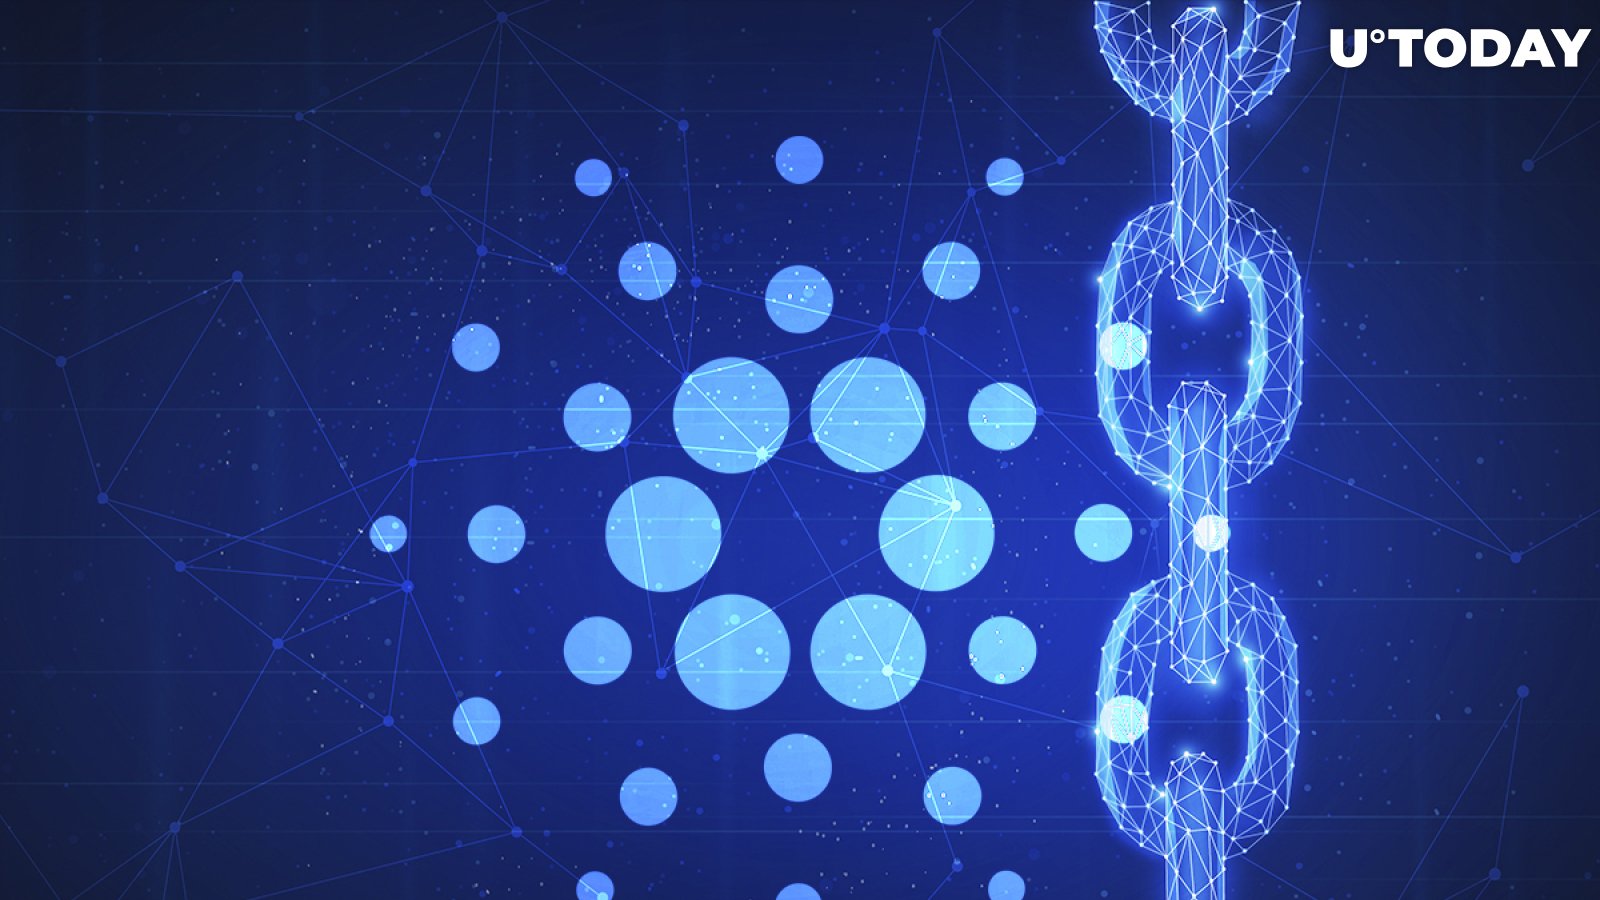 Cross-Chain Collaterals for Cardano Are Now Possible After Ardana and Elrond Partnership